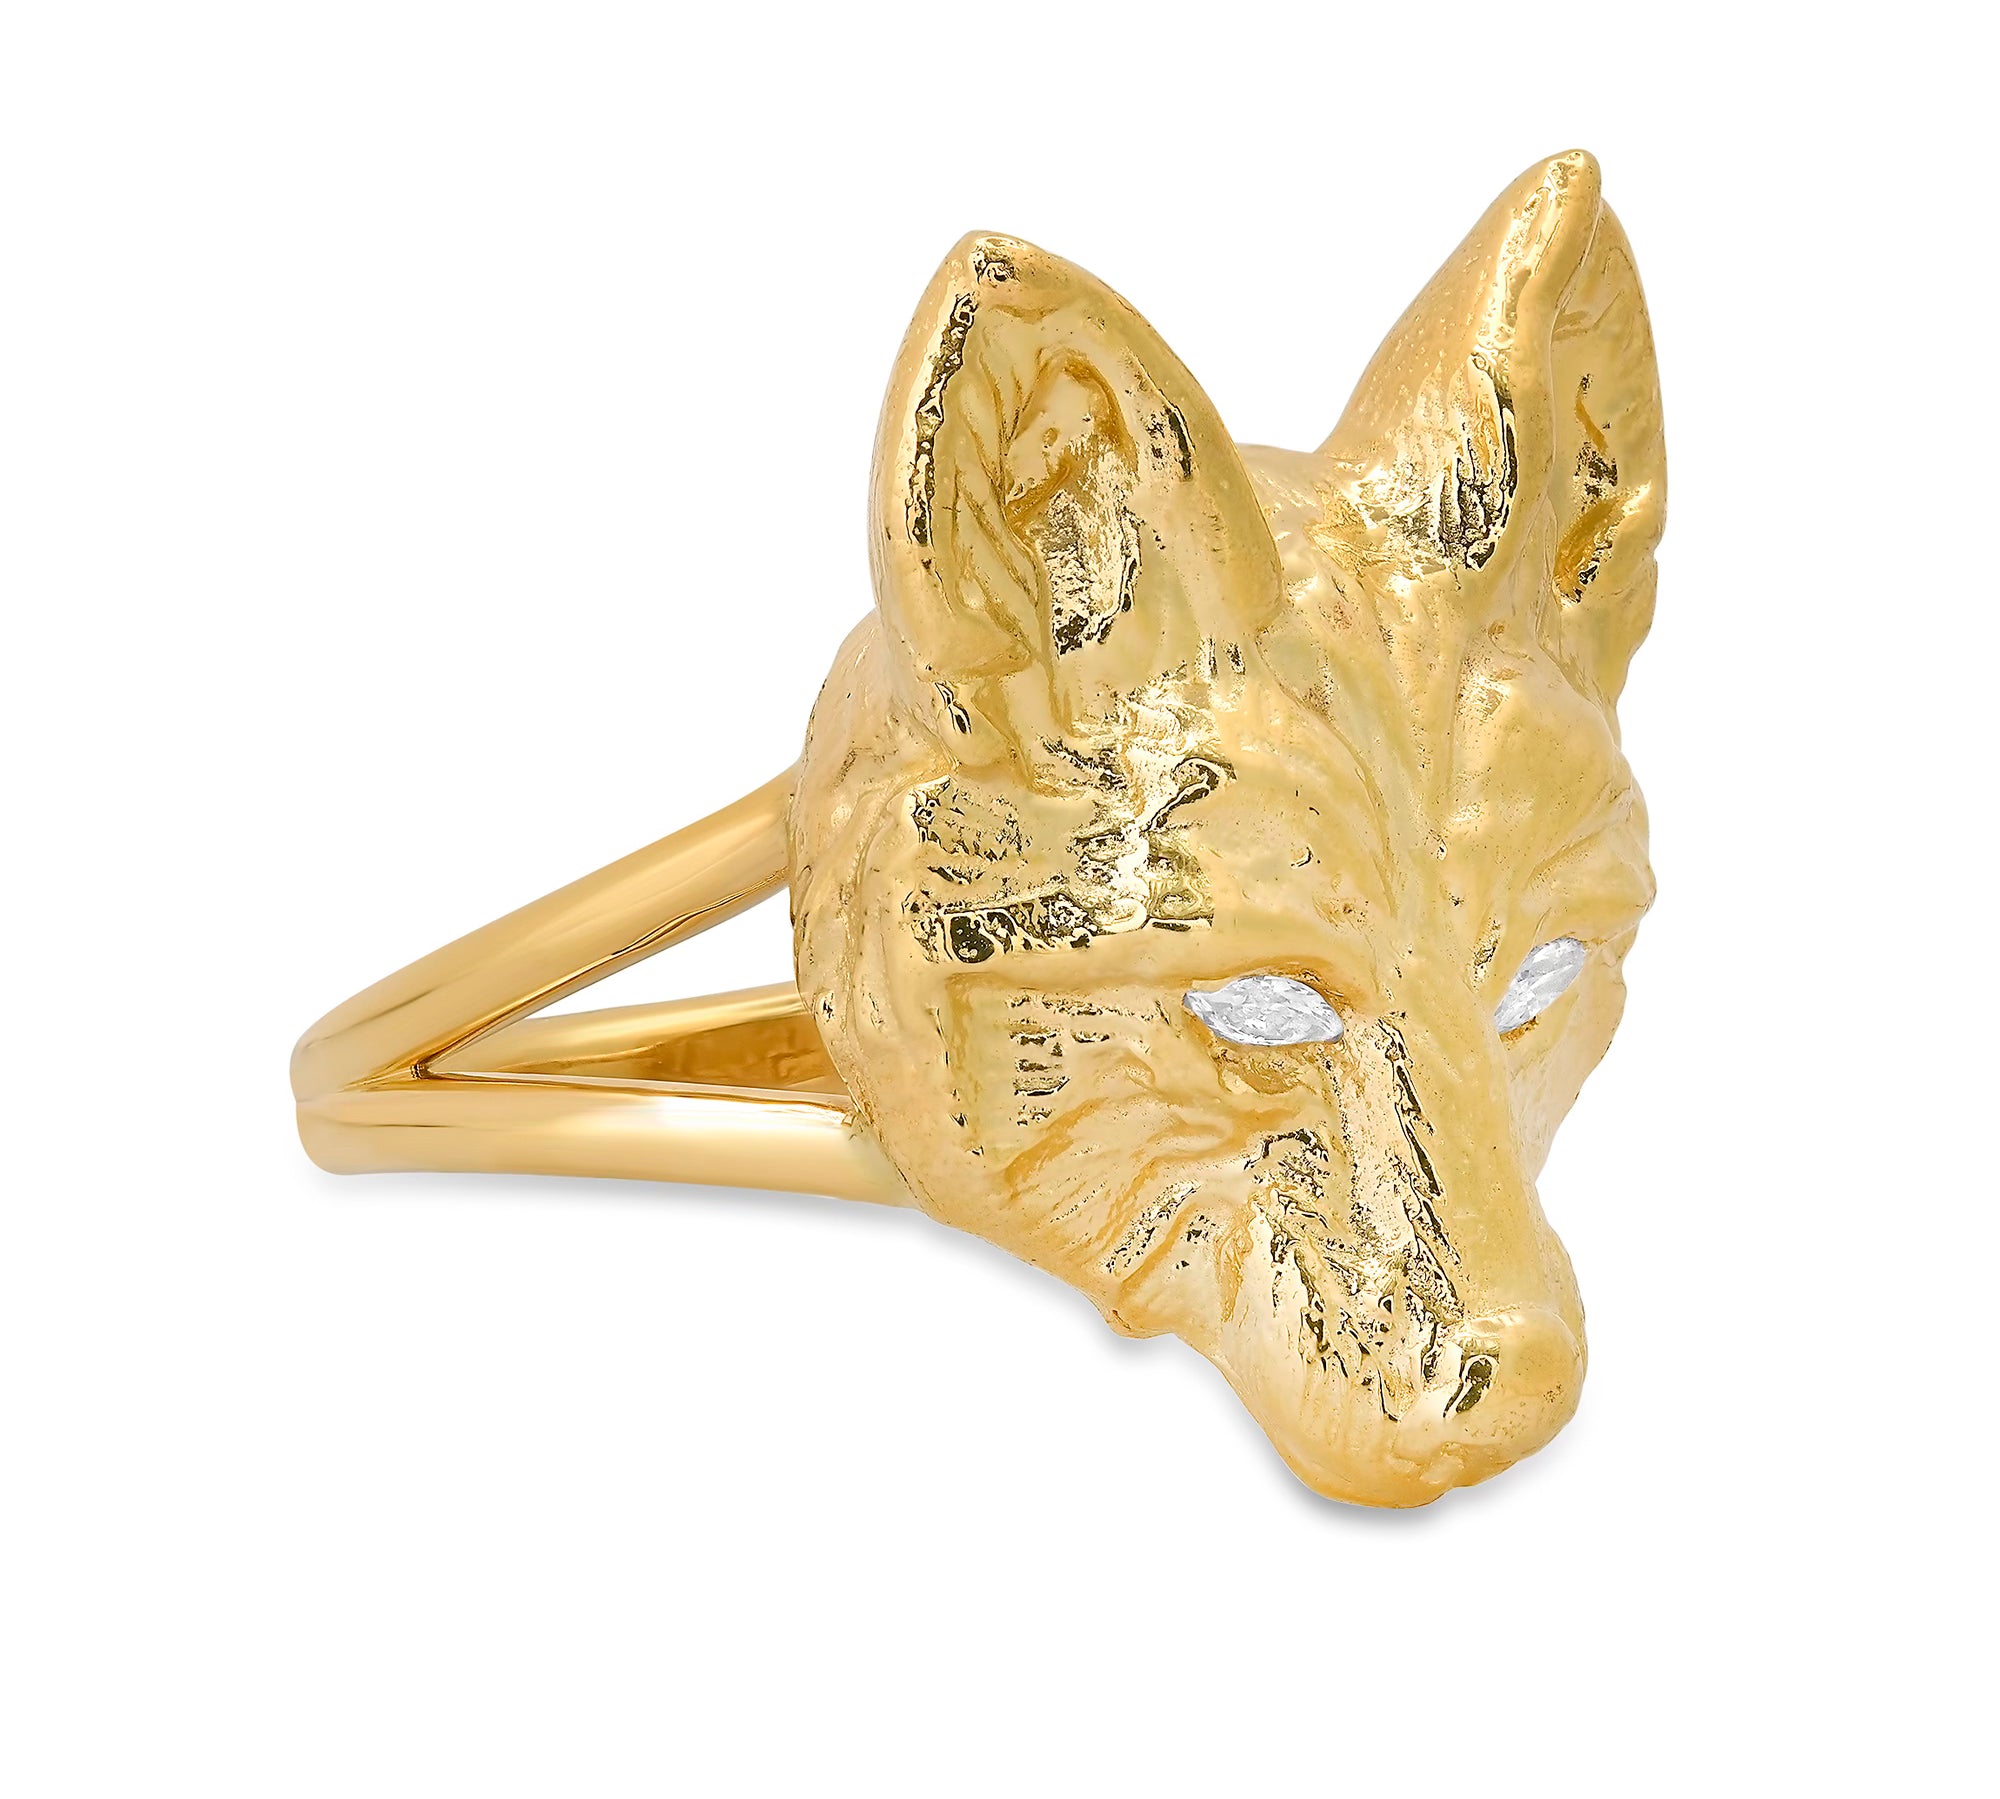 Wolf Ring Ring Elisabeth Bell Jewelry   